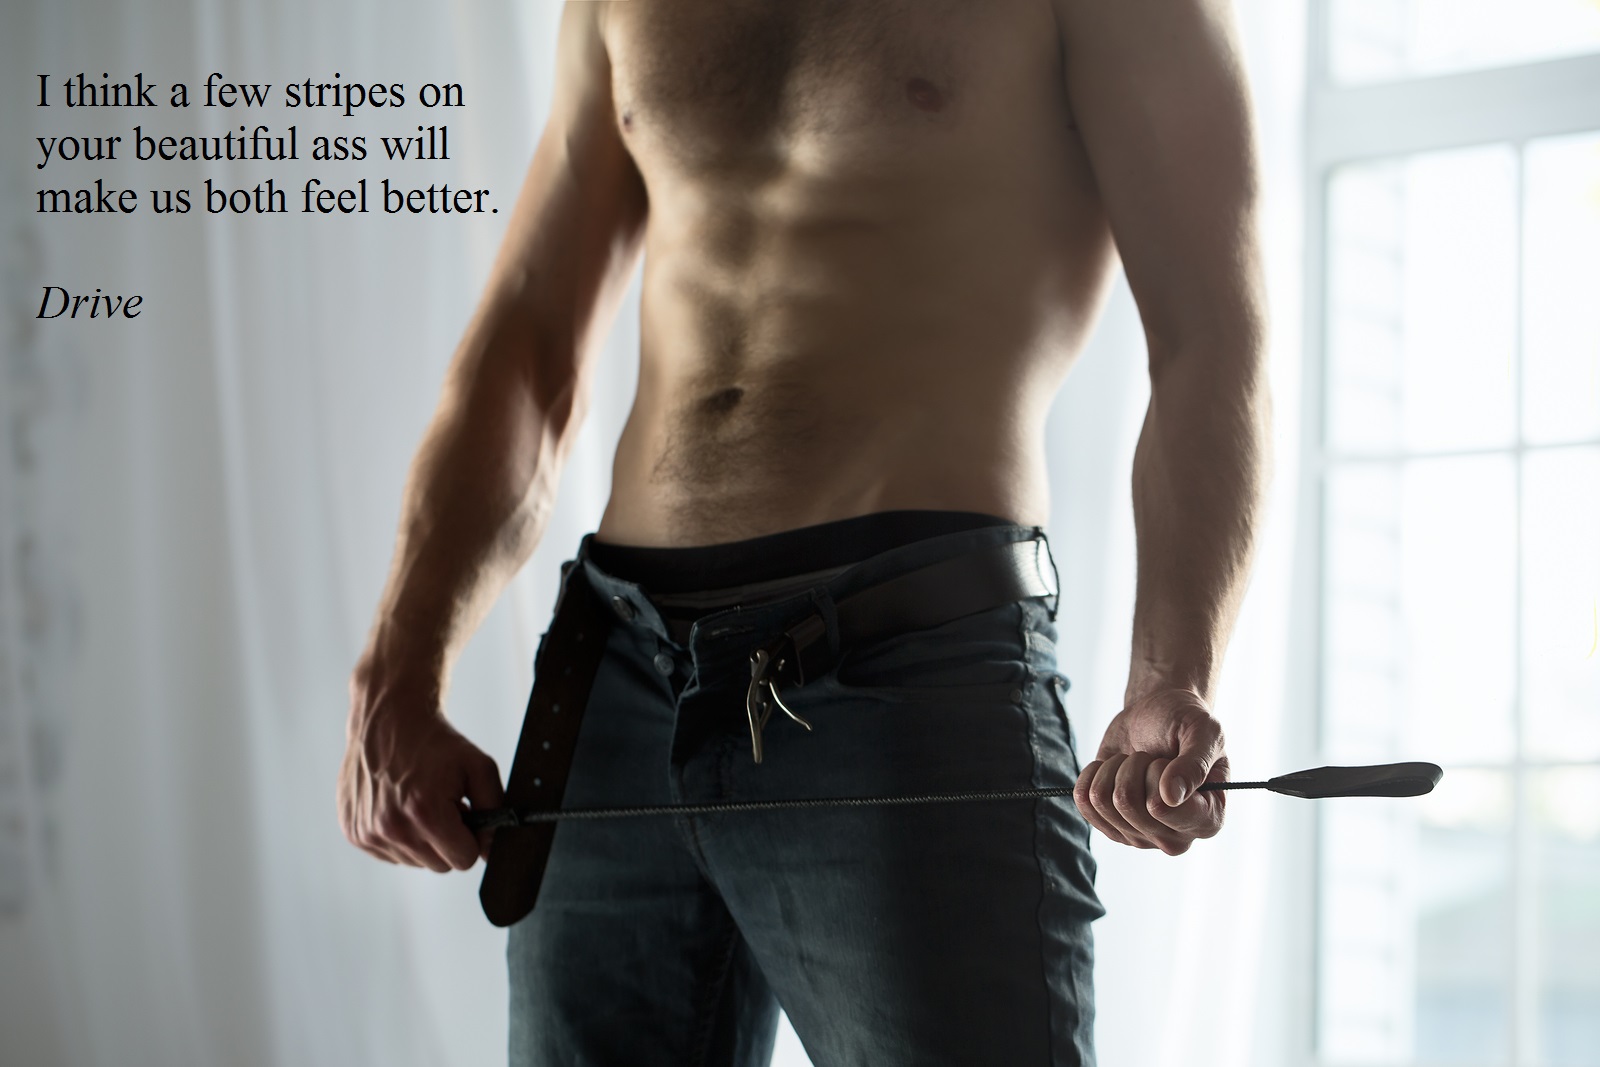 Topless guy with jeans unbuttoned playfully holding a riding crop. Text says